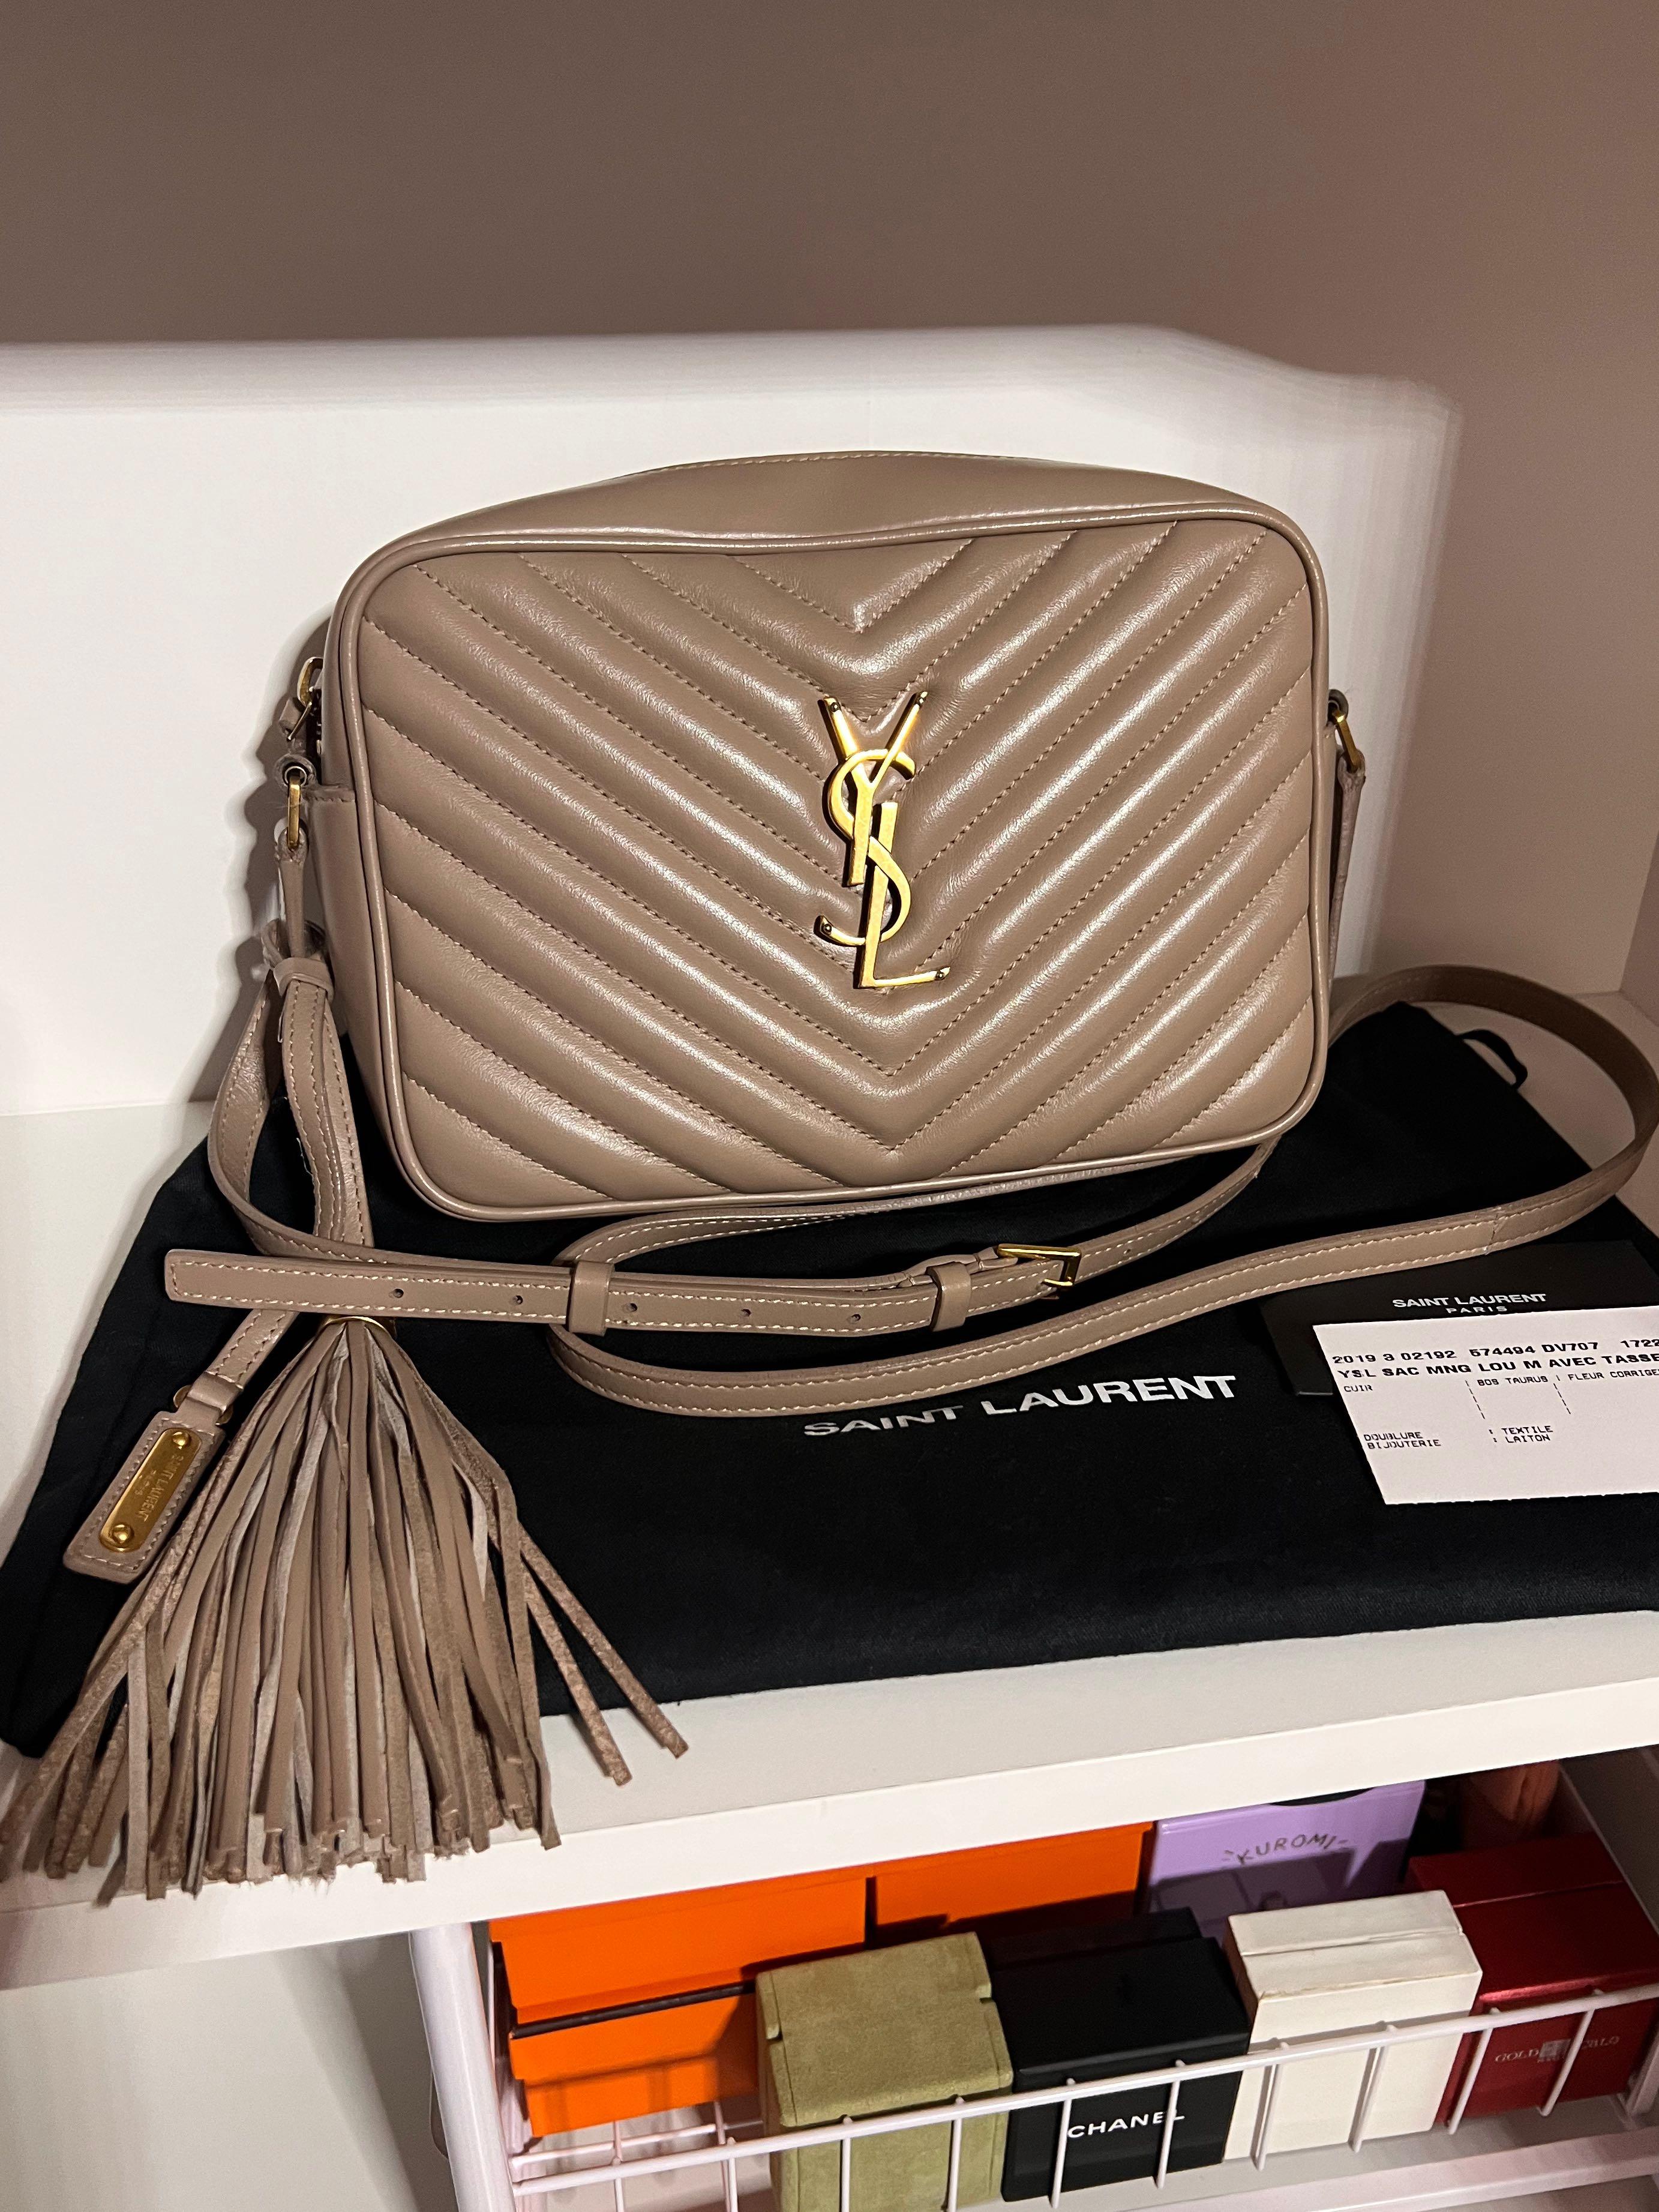 YSL LOU CAMERA BAG FULL REVIEW AND HOW TO WEAR IT